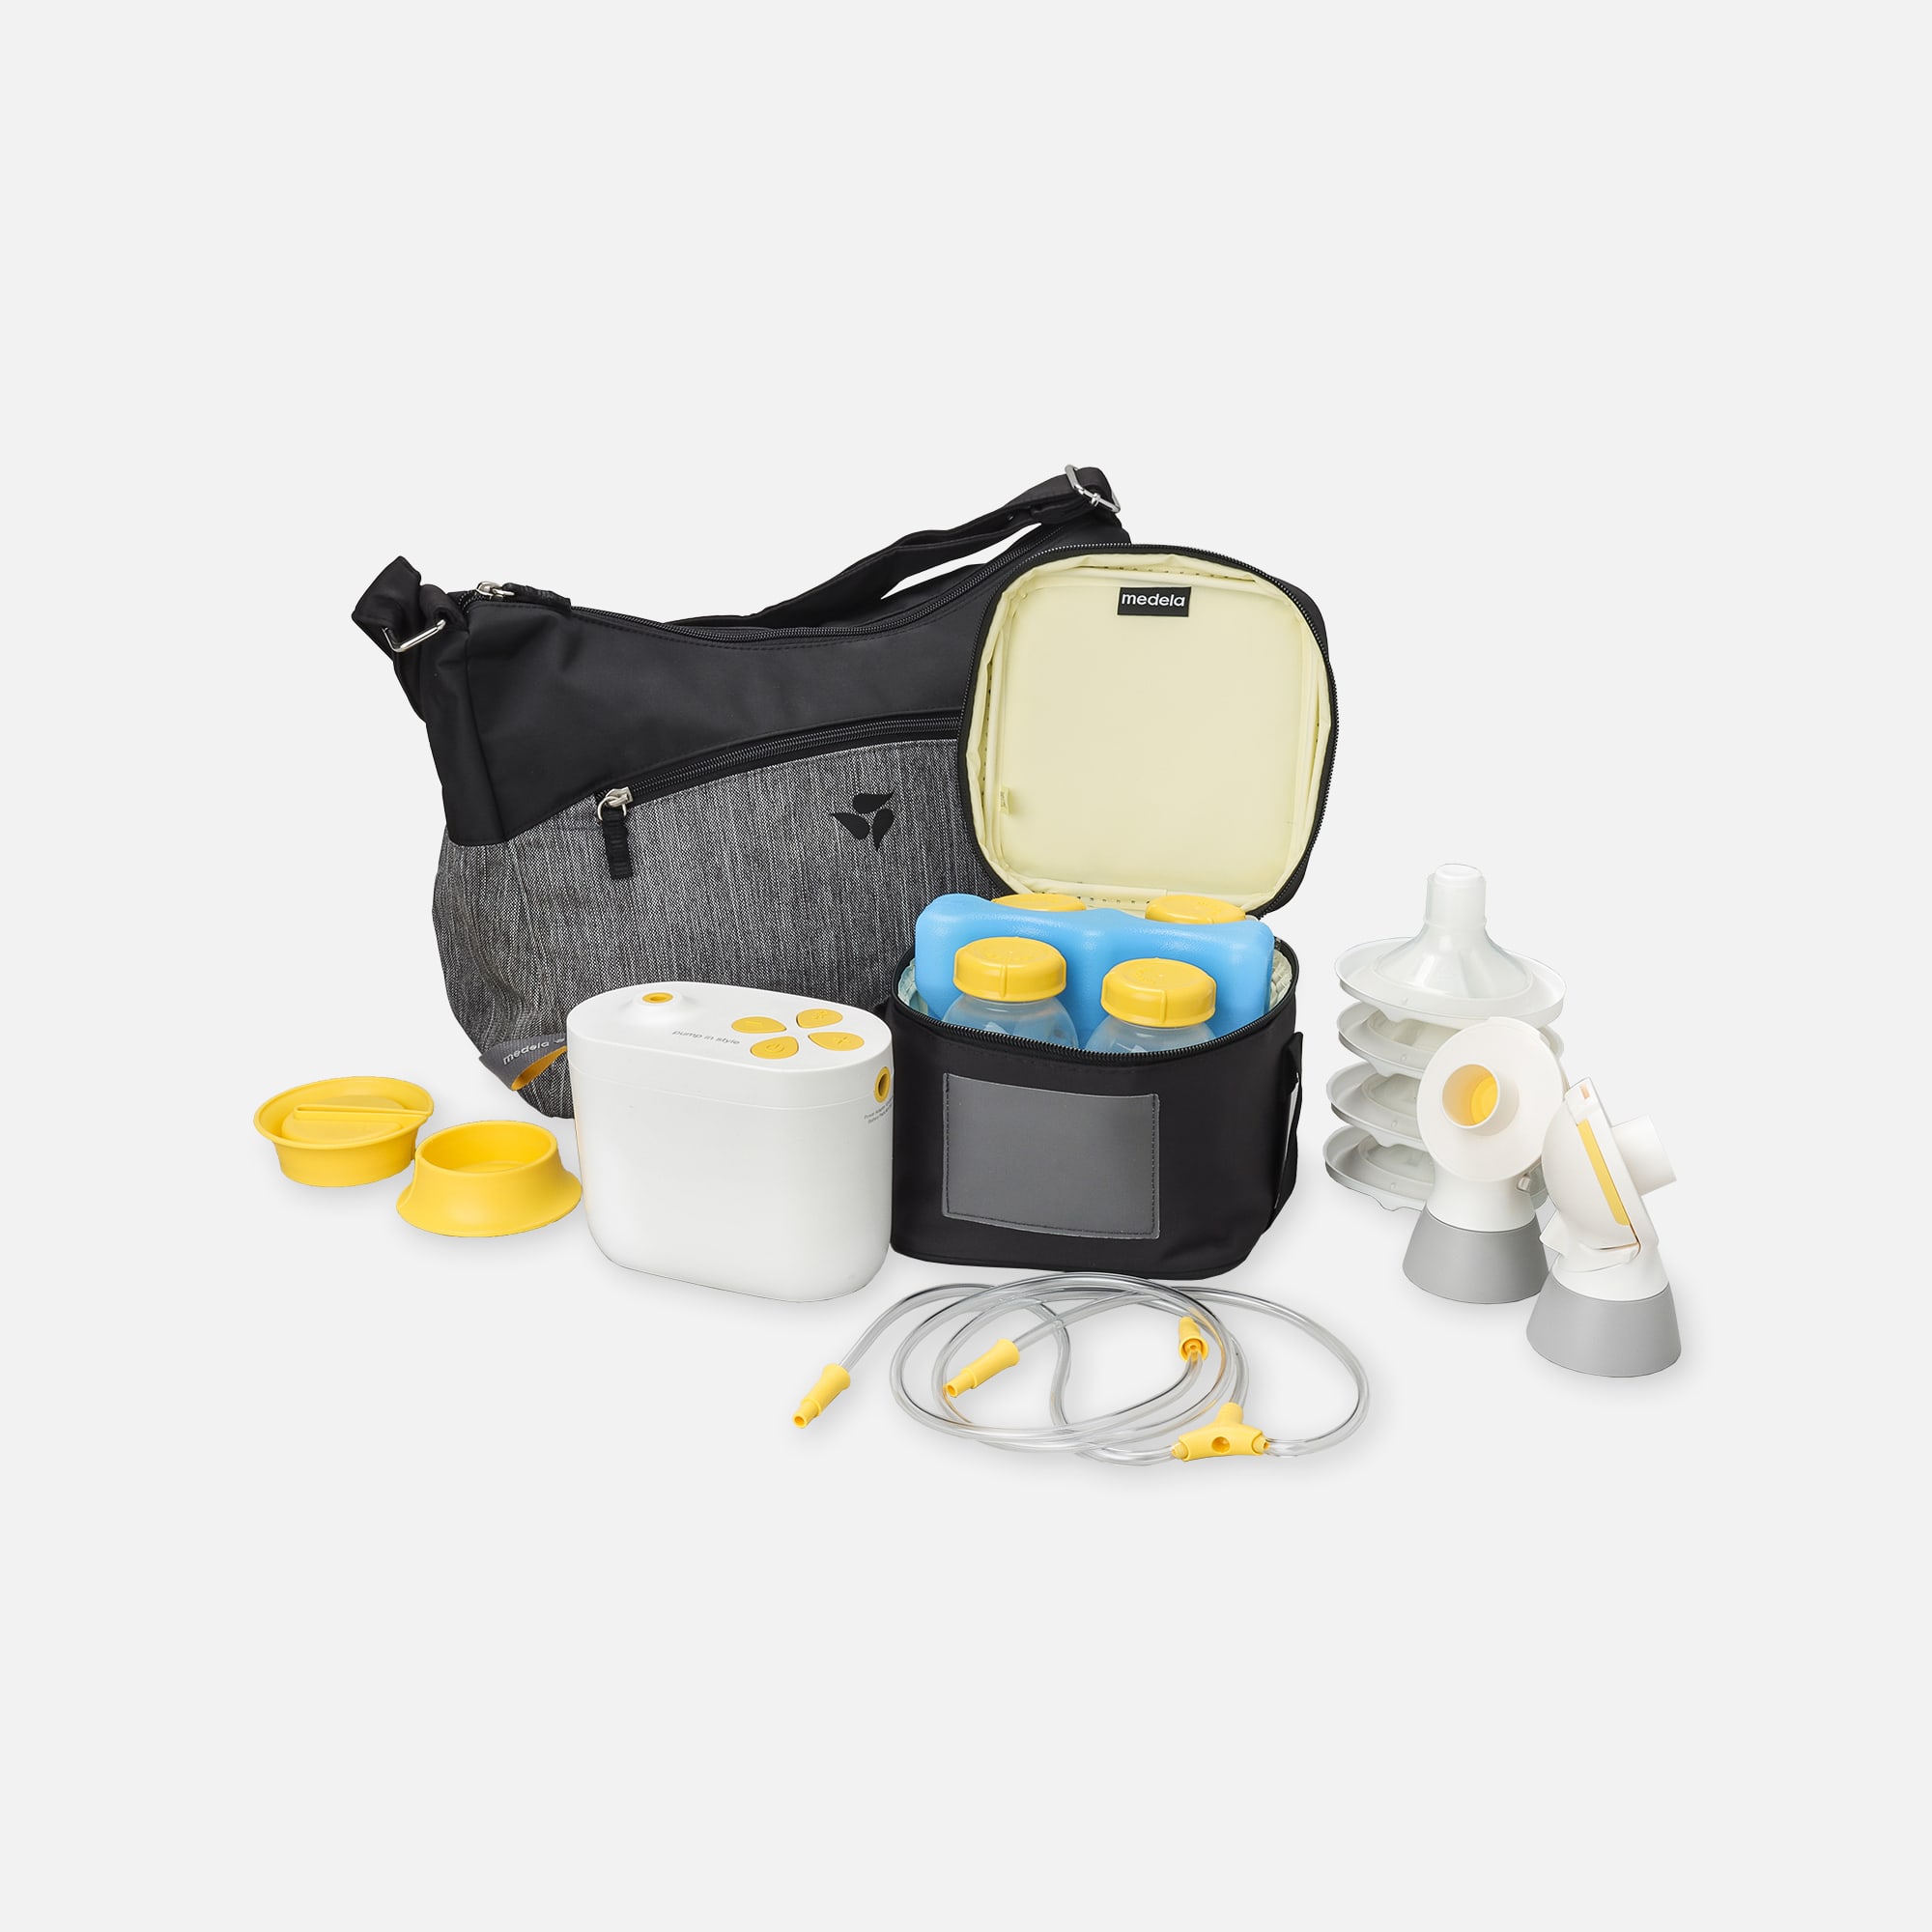 https://www.welldeservedhealth.com/on/demandware.static/-/Sites-hec-master/default/dw6d183305/images/large/medela-pump-in-style-double-electric-breast-pump-with-max-flow-technology-30329-02.jpg